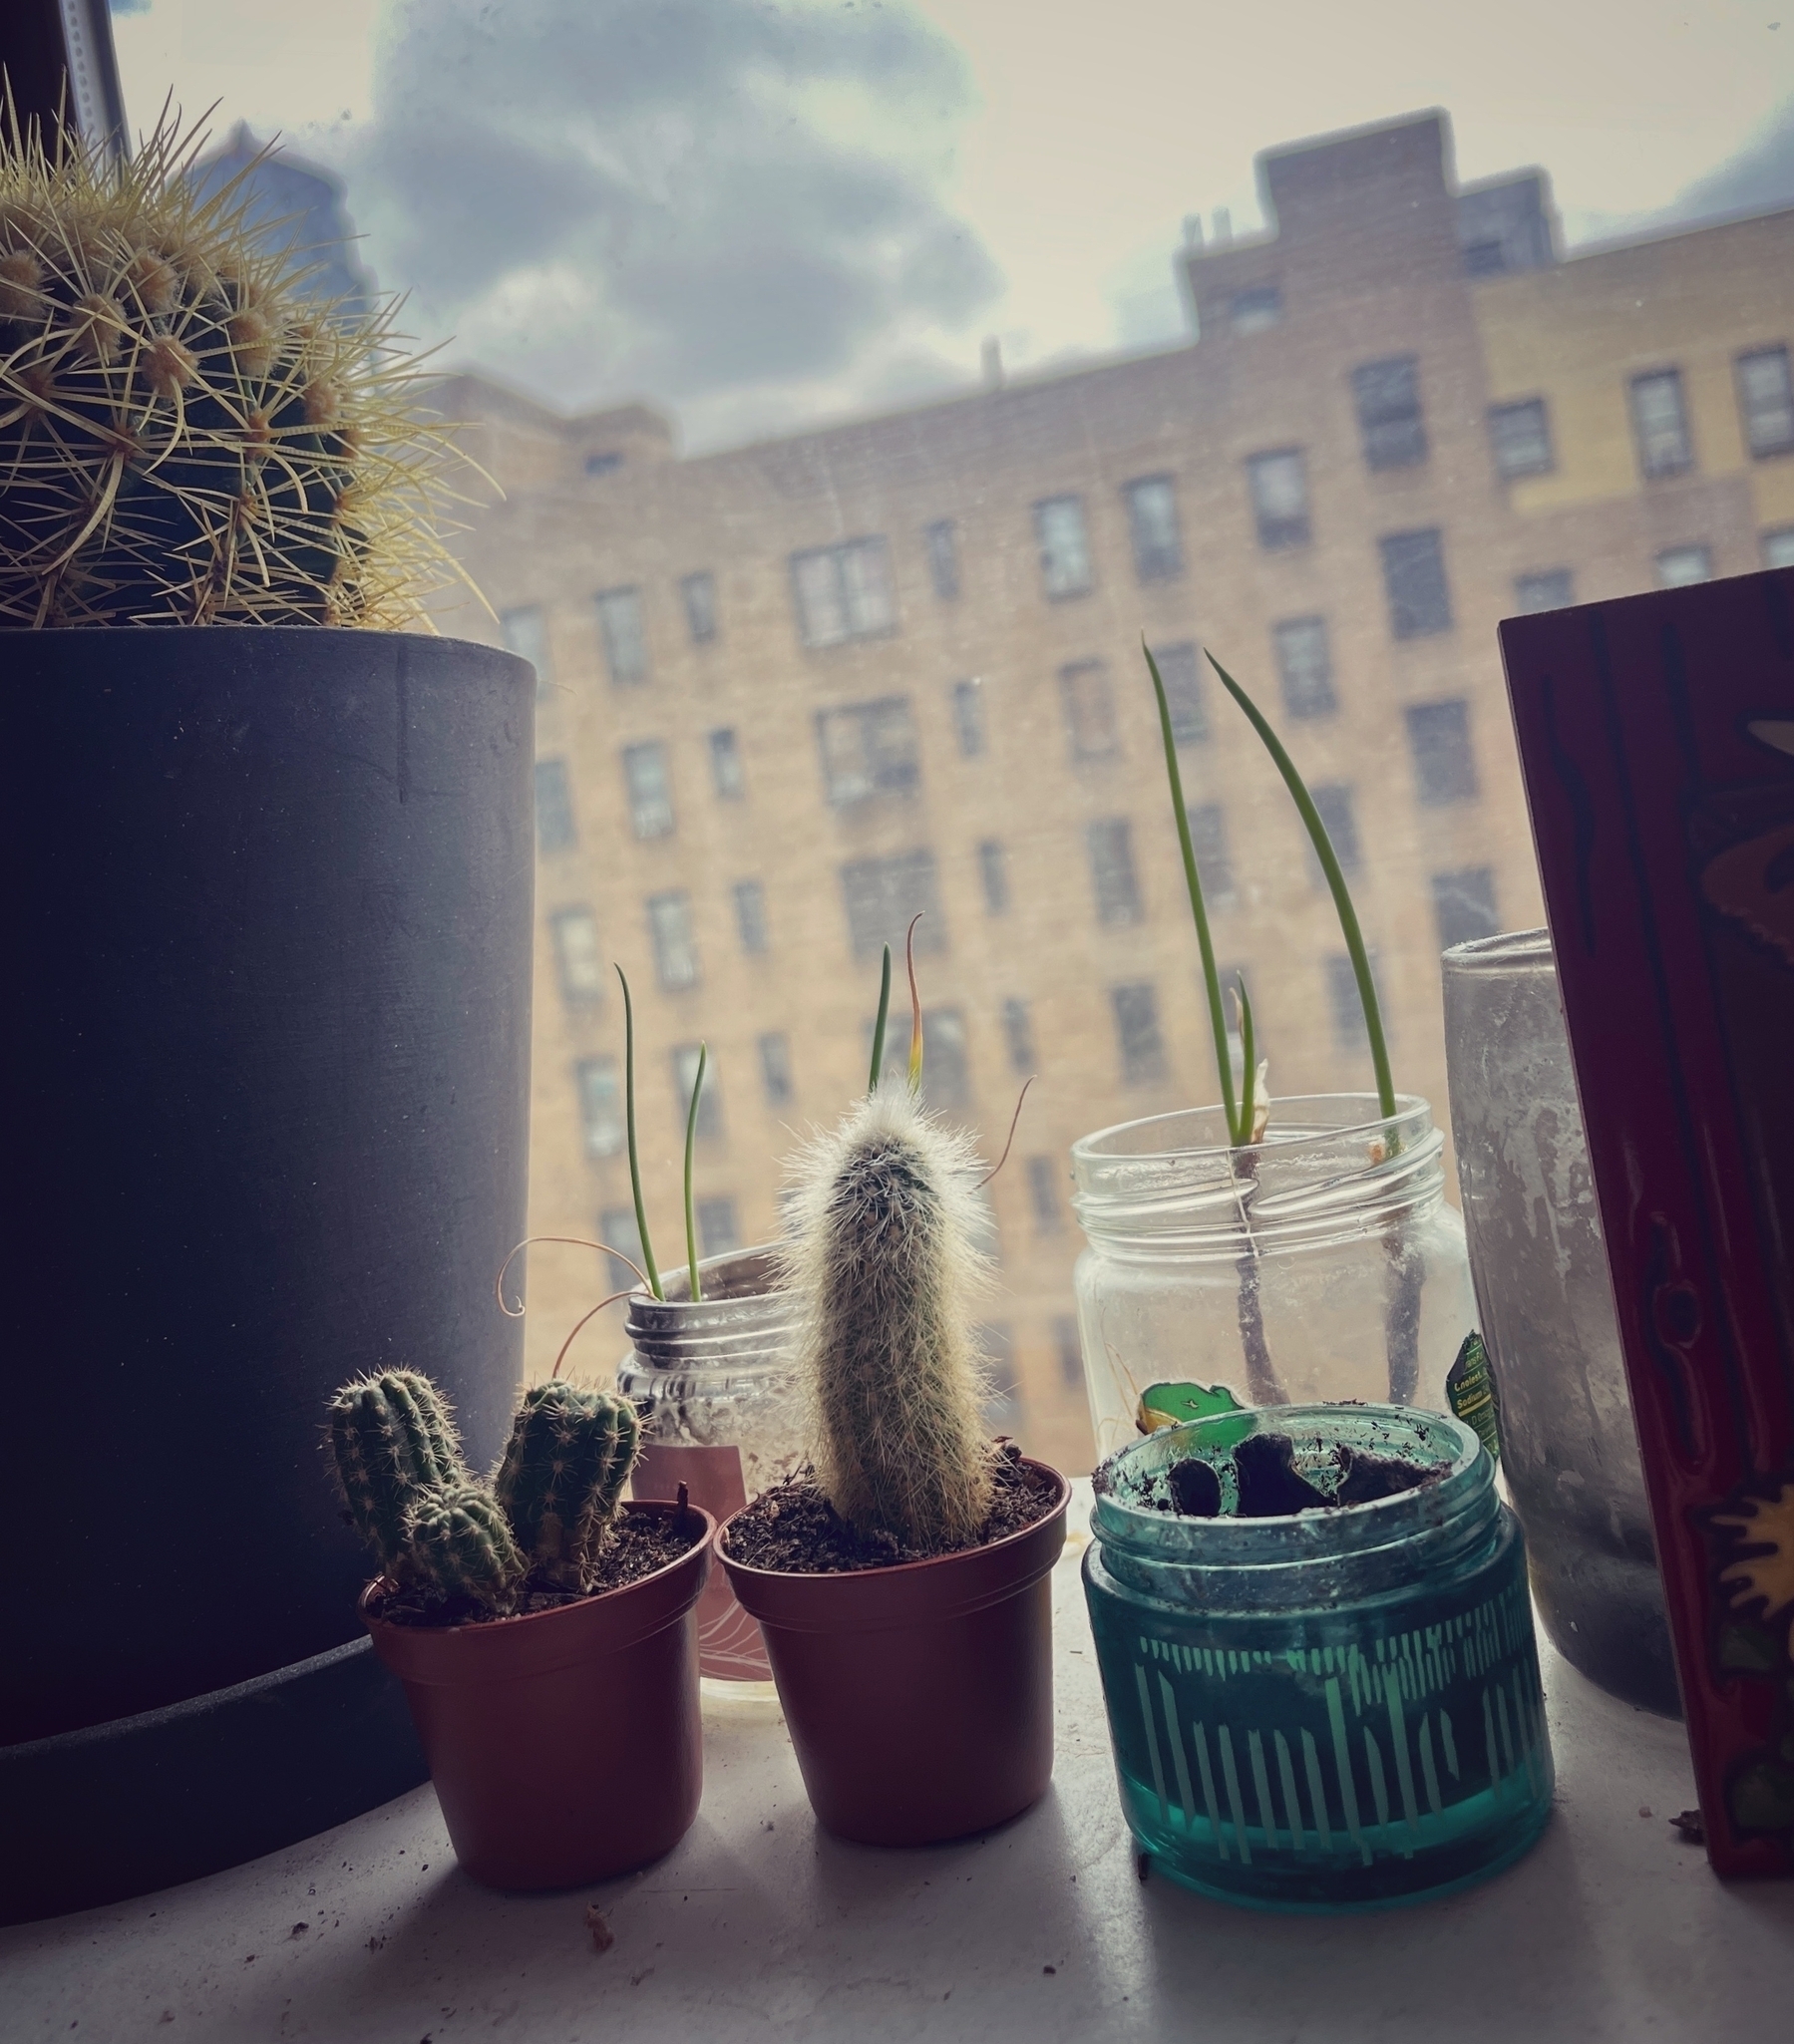 Three small plants, two cacti and one green onion in a jar on a shelf next to the window &10;&10;